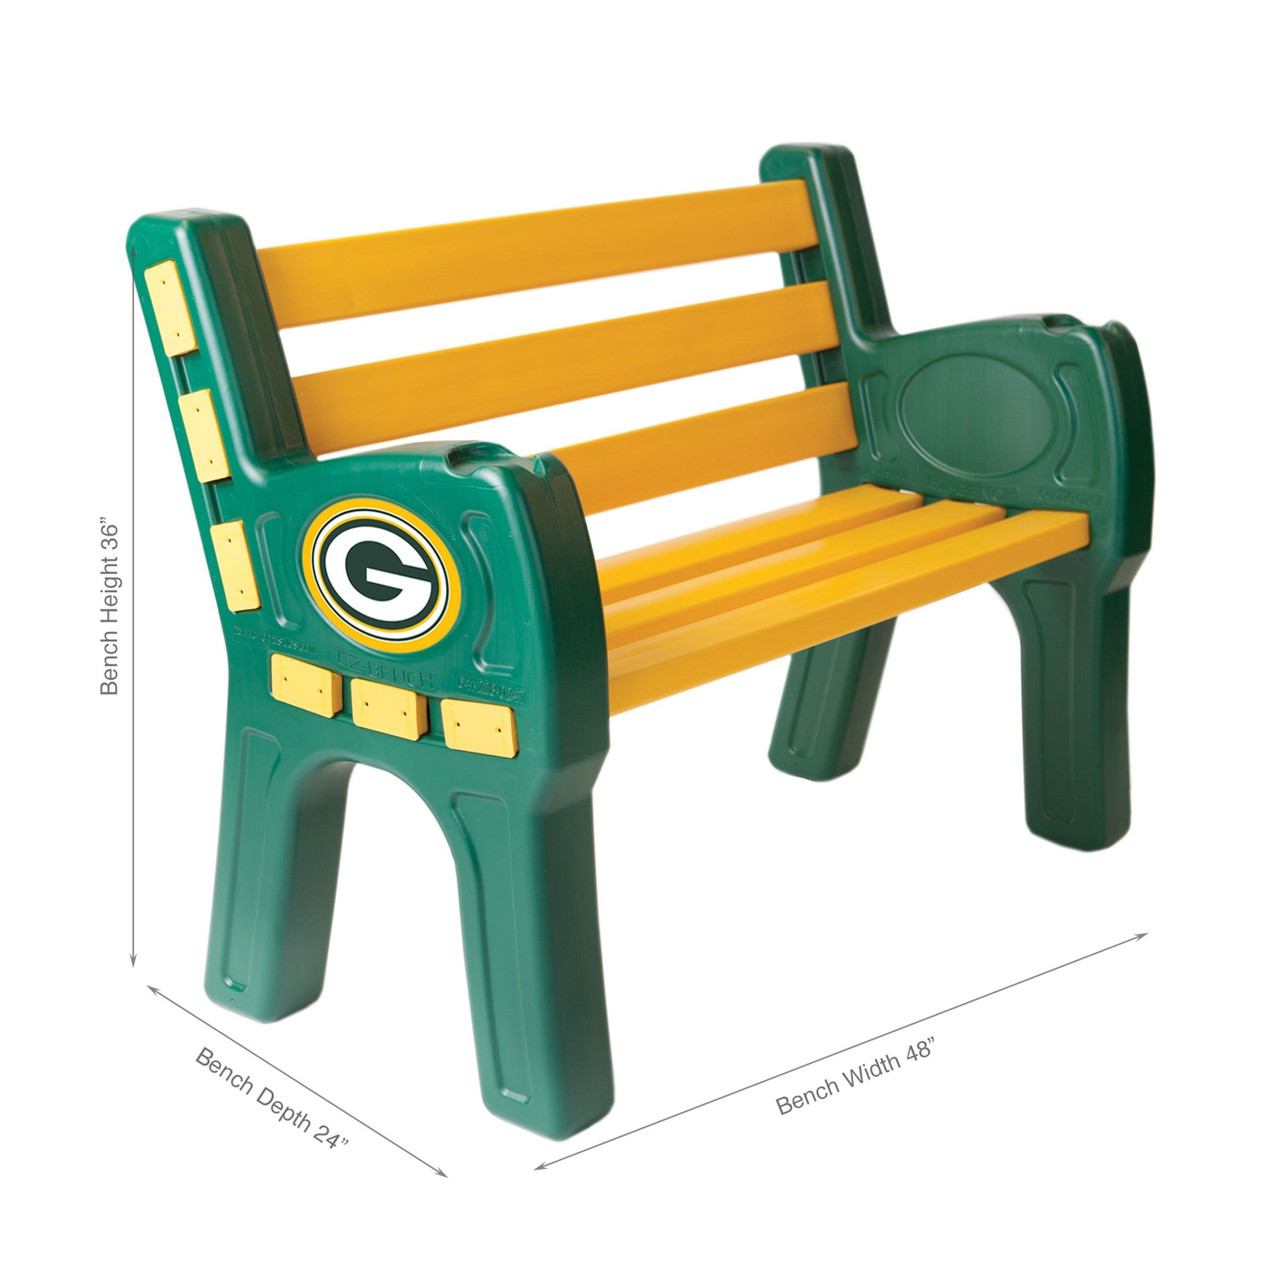 Green Bay, GB, Packers, 4', Park, Bench, 188-1001, Imperial, NFL